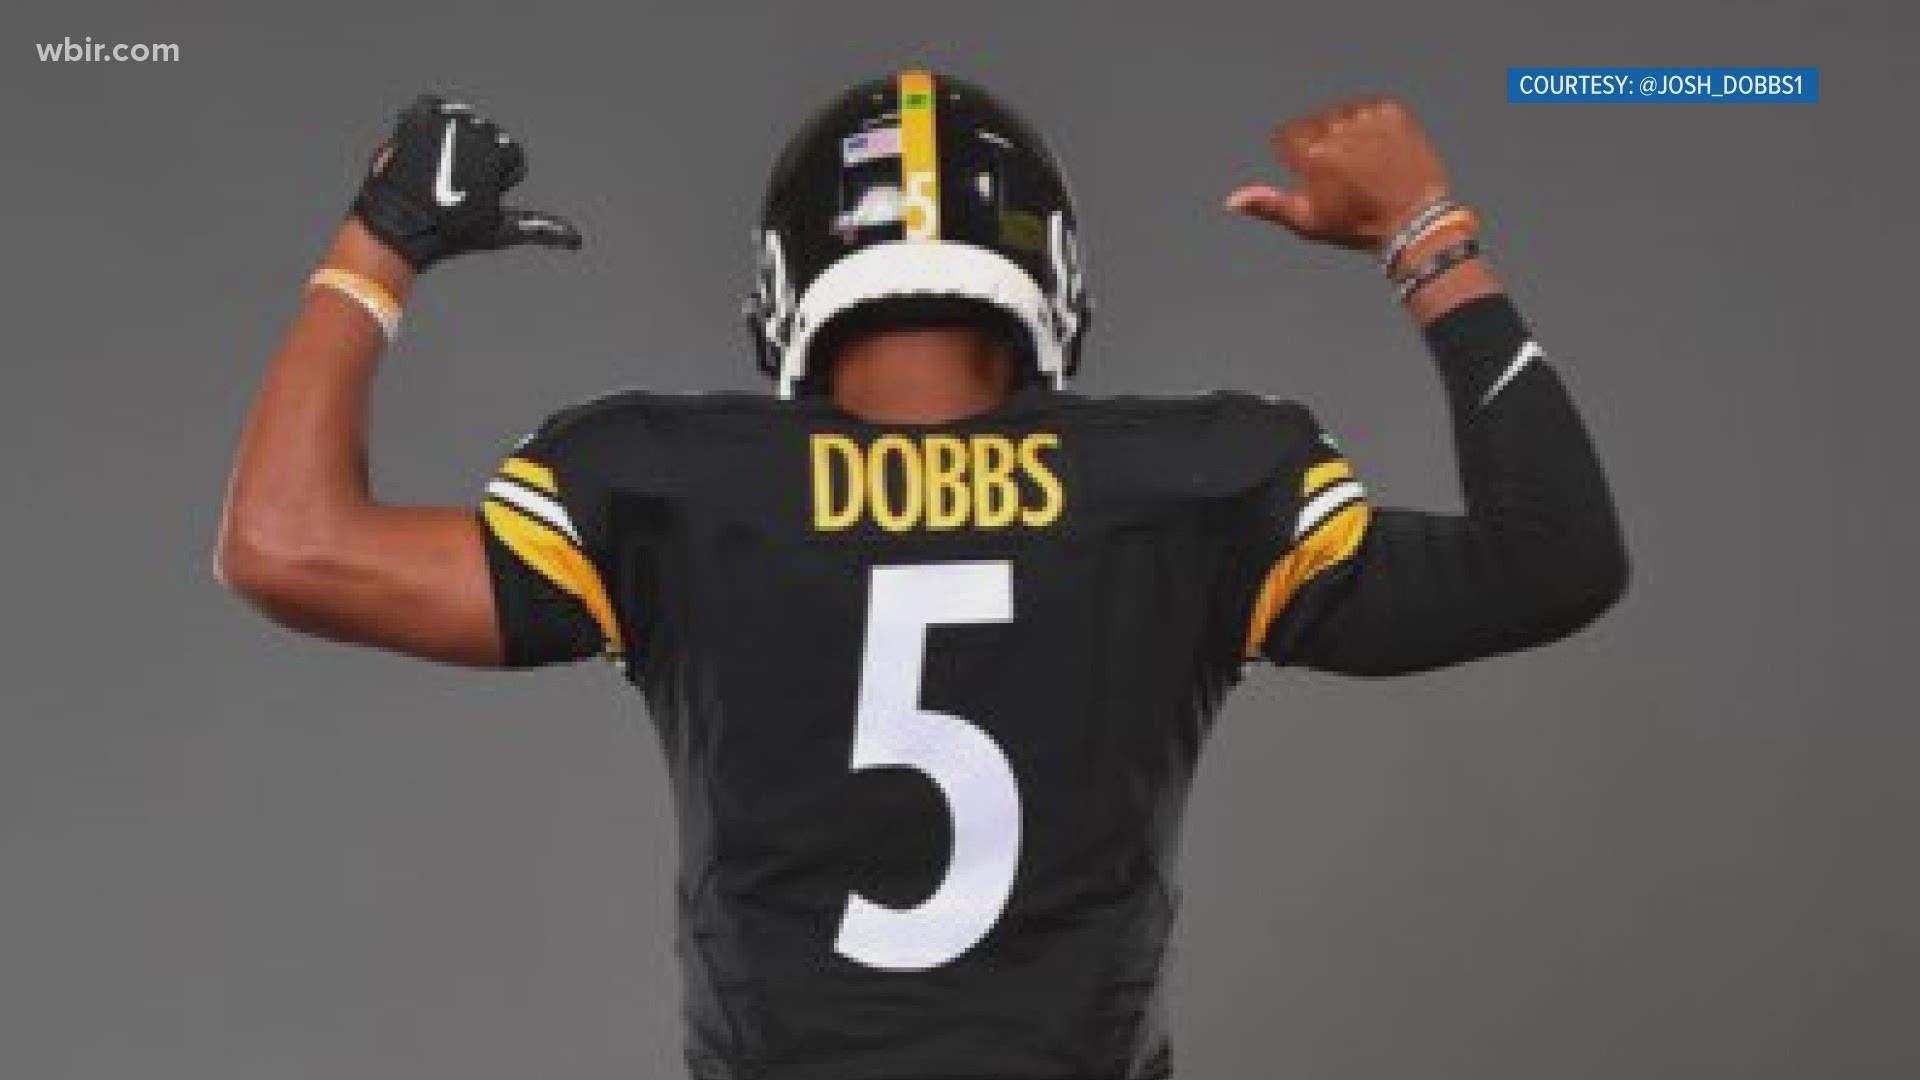 Dobbs was traded to Jacksonville back in 2019. The Steelers released quarterback Duck Hodges to make room for Dobbs on the roster.